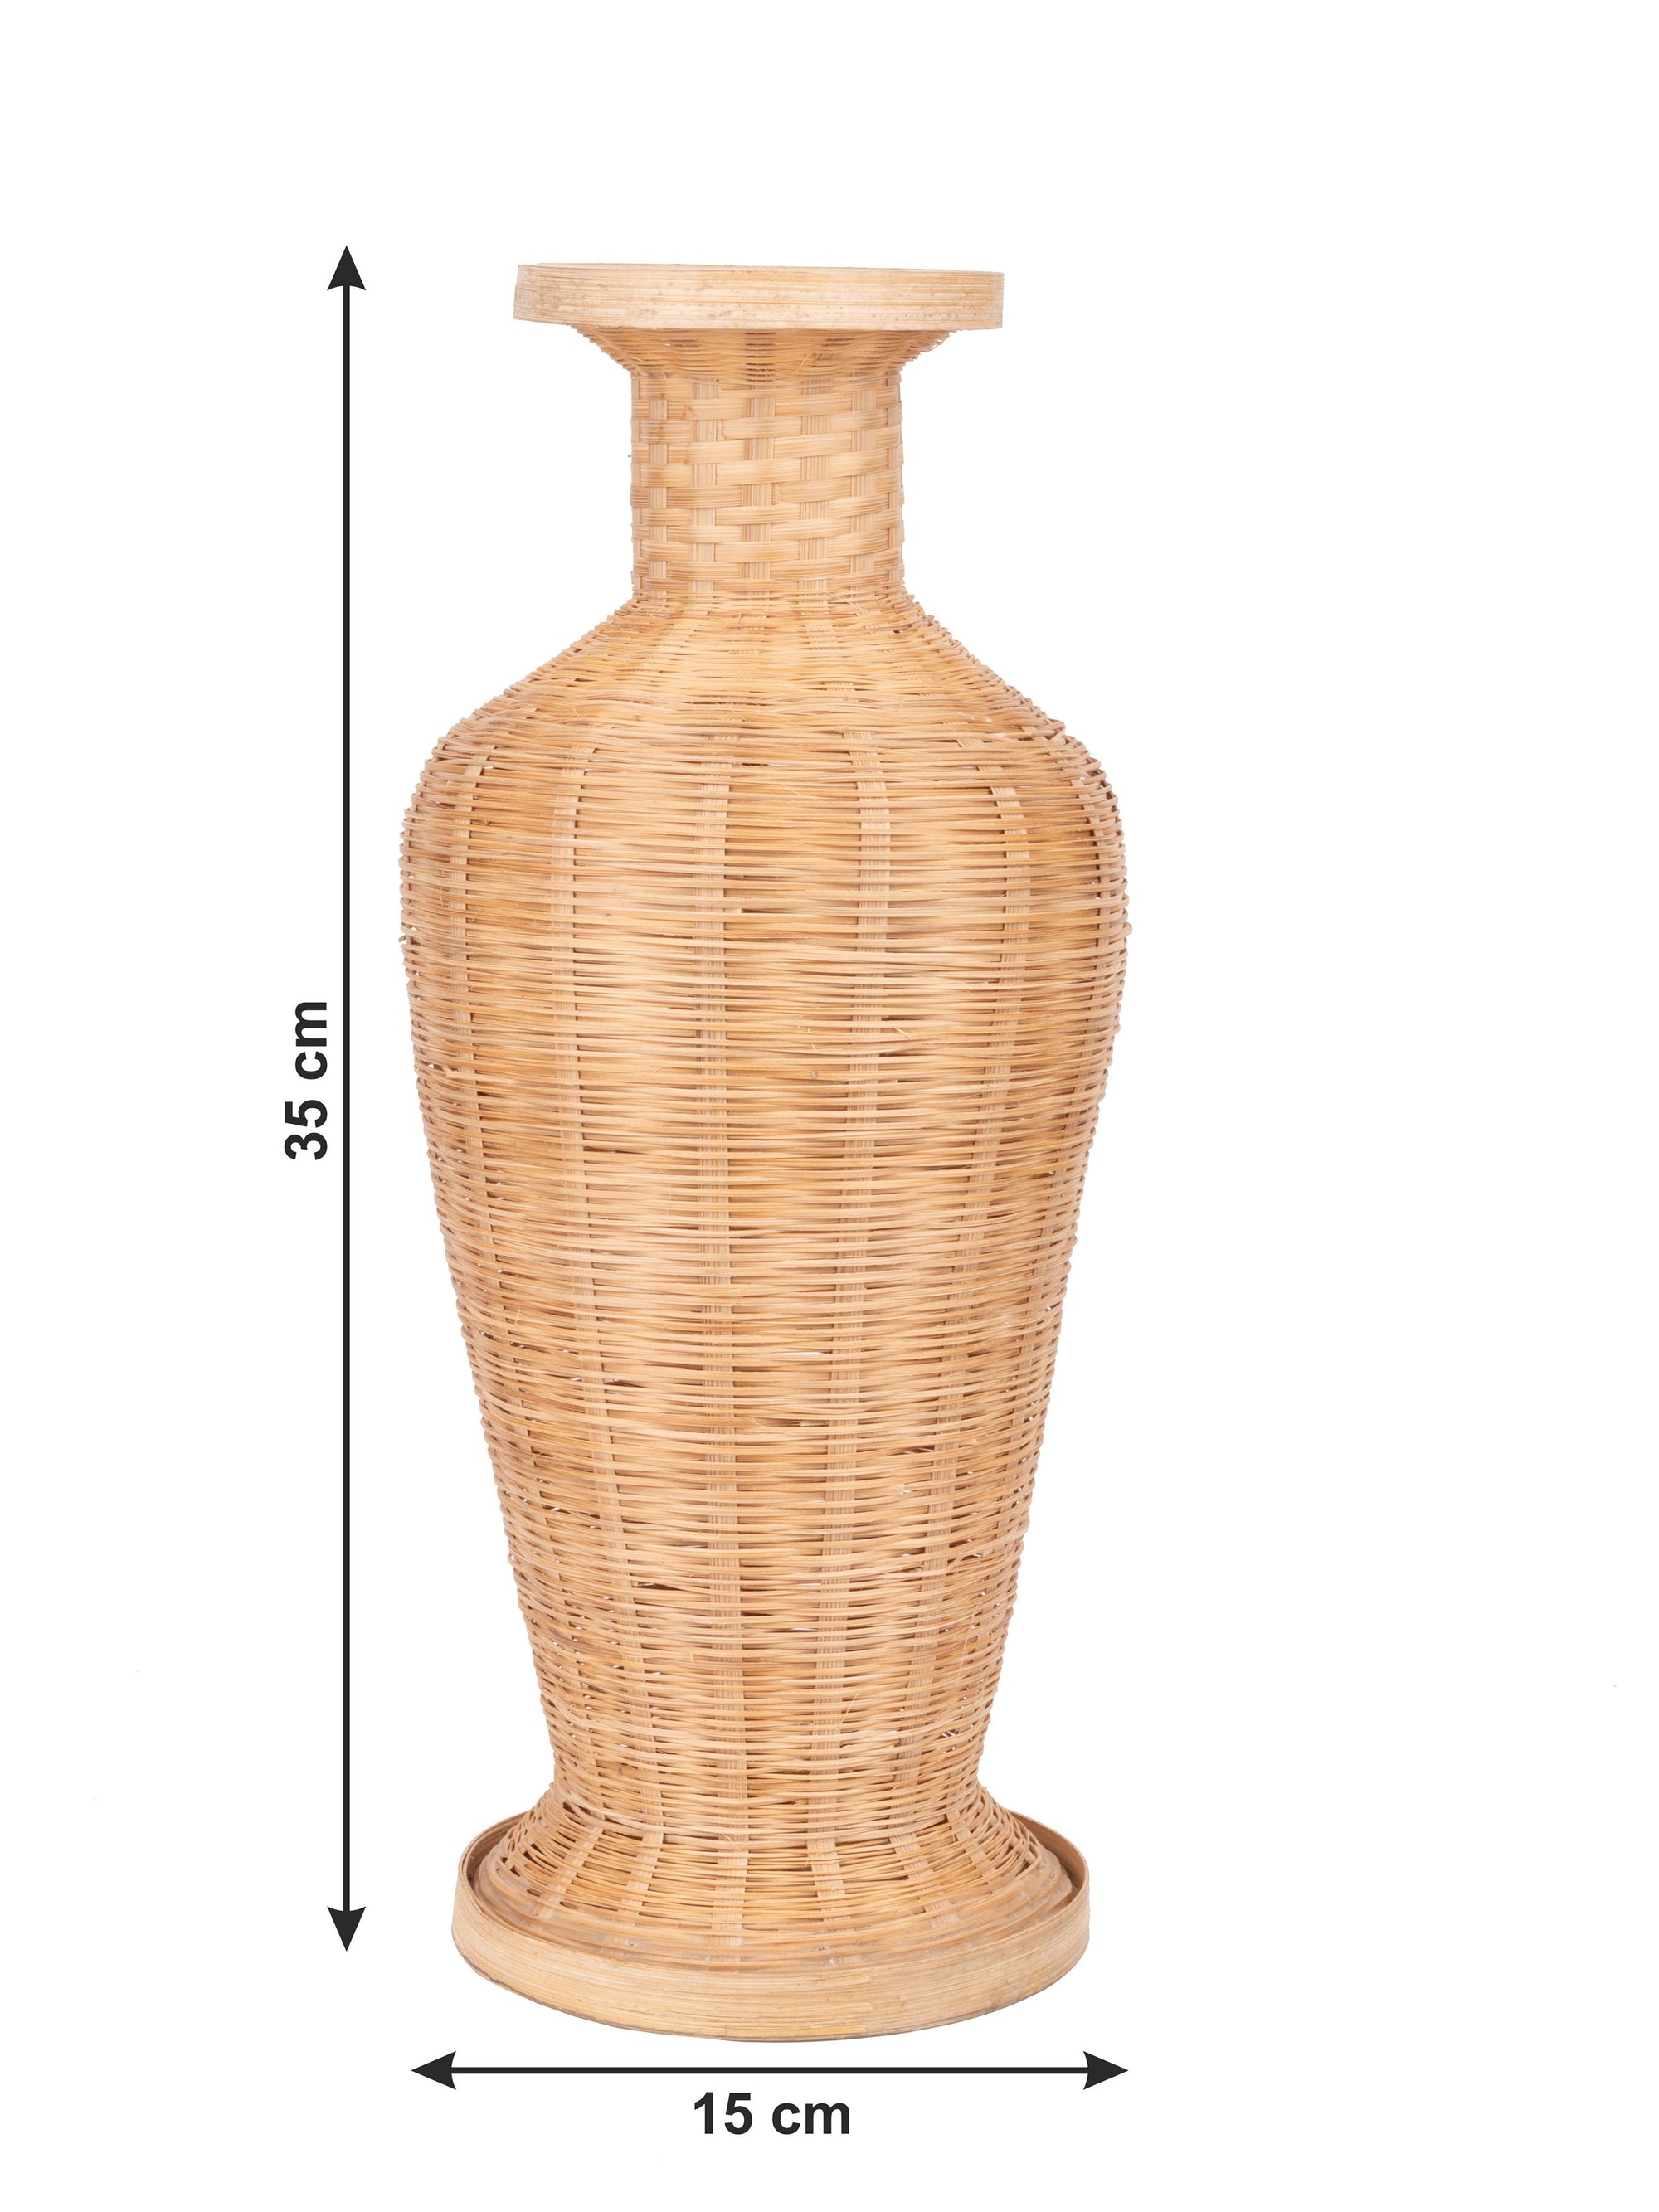 Shantiniketan Art - Bamboo Weave Flower Vase - 14 inches Height - The Heritage Artefacts